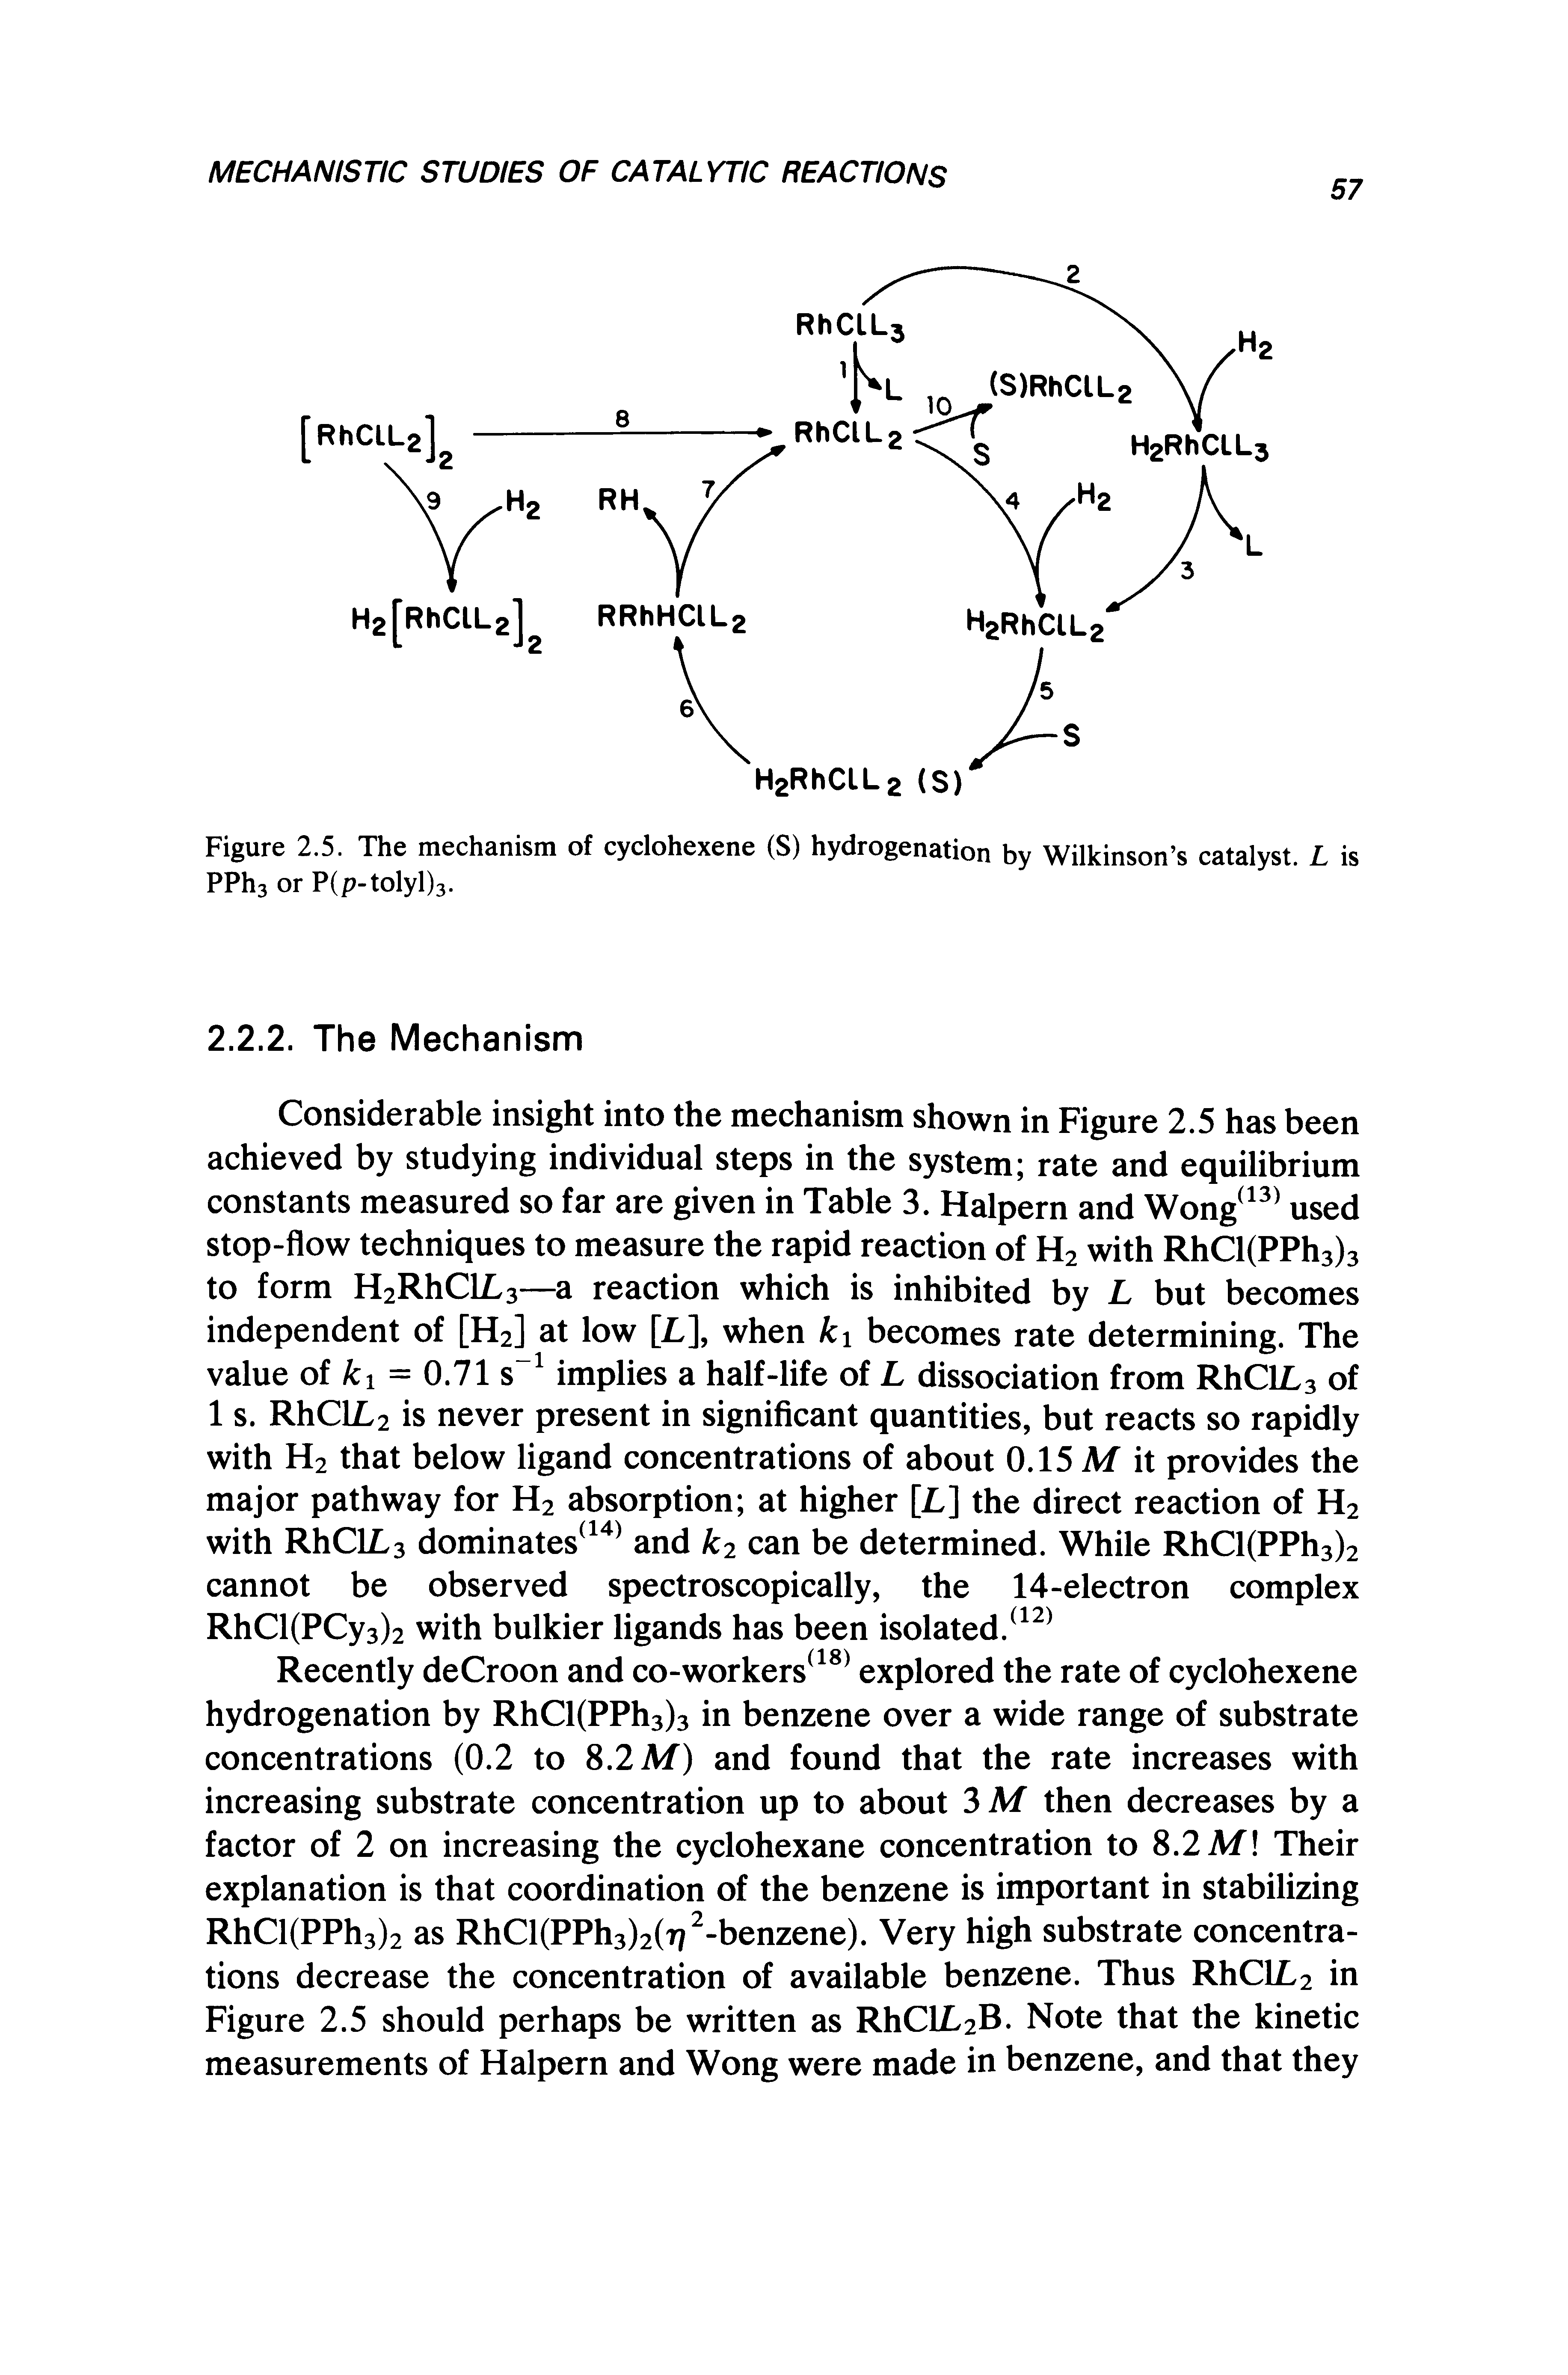 Figure 2.5. The mechanism of cyclohexene (S) hydrogenation by Wilkinson s catalyst. L is PPha or P(p-tolyl)3.